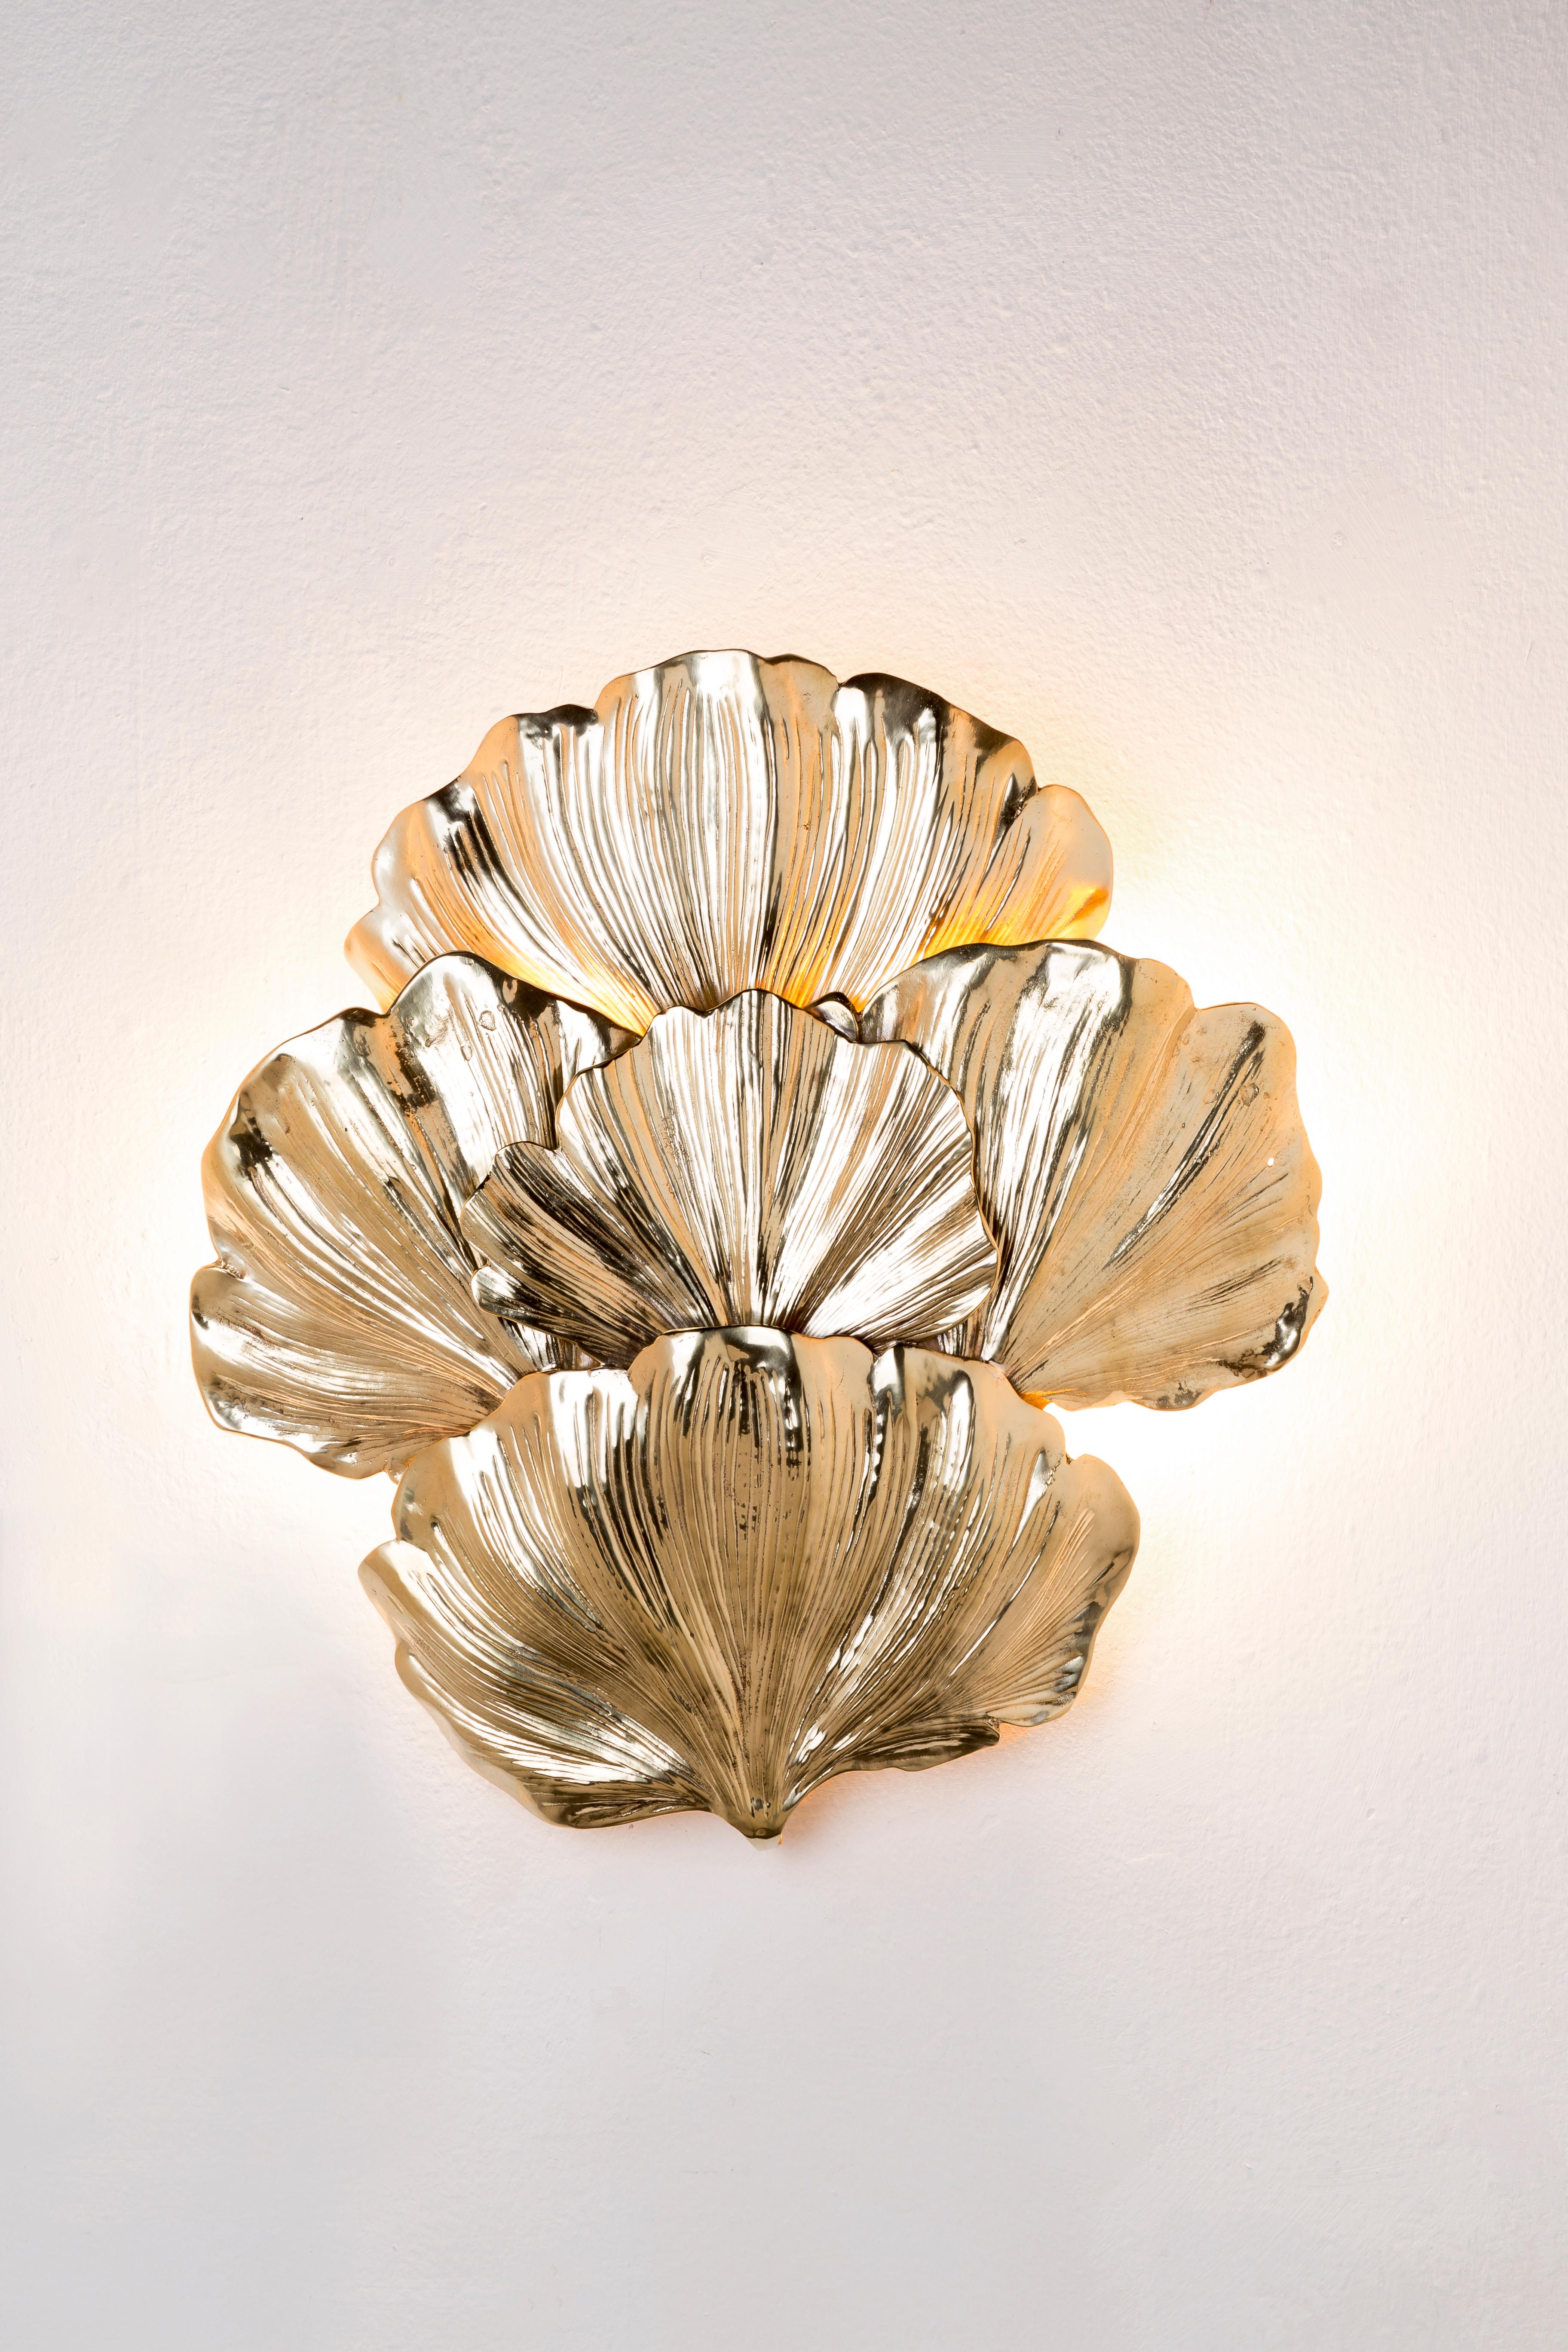 The fifth leaves Ginkgo applique is in cast brass natural finish, this brass working technique allows you to have shapes rich in details such as the natural veins of the leaves and their movement; this five leaves applique is a perfect decorative